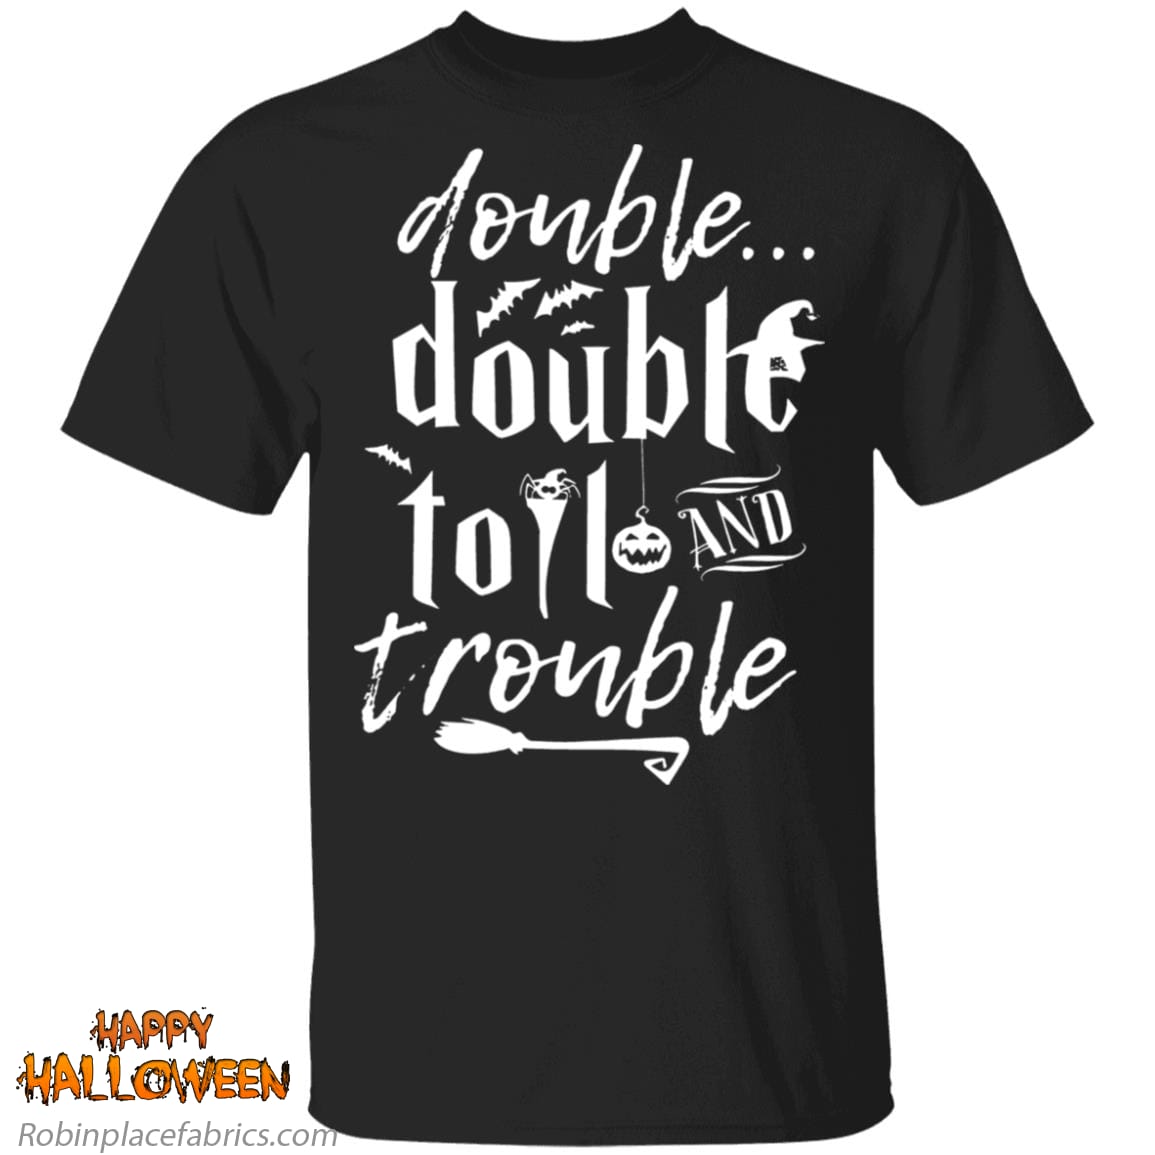 halloween-double-double-toil-and-trouble-shirt-robinplacefabrics